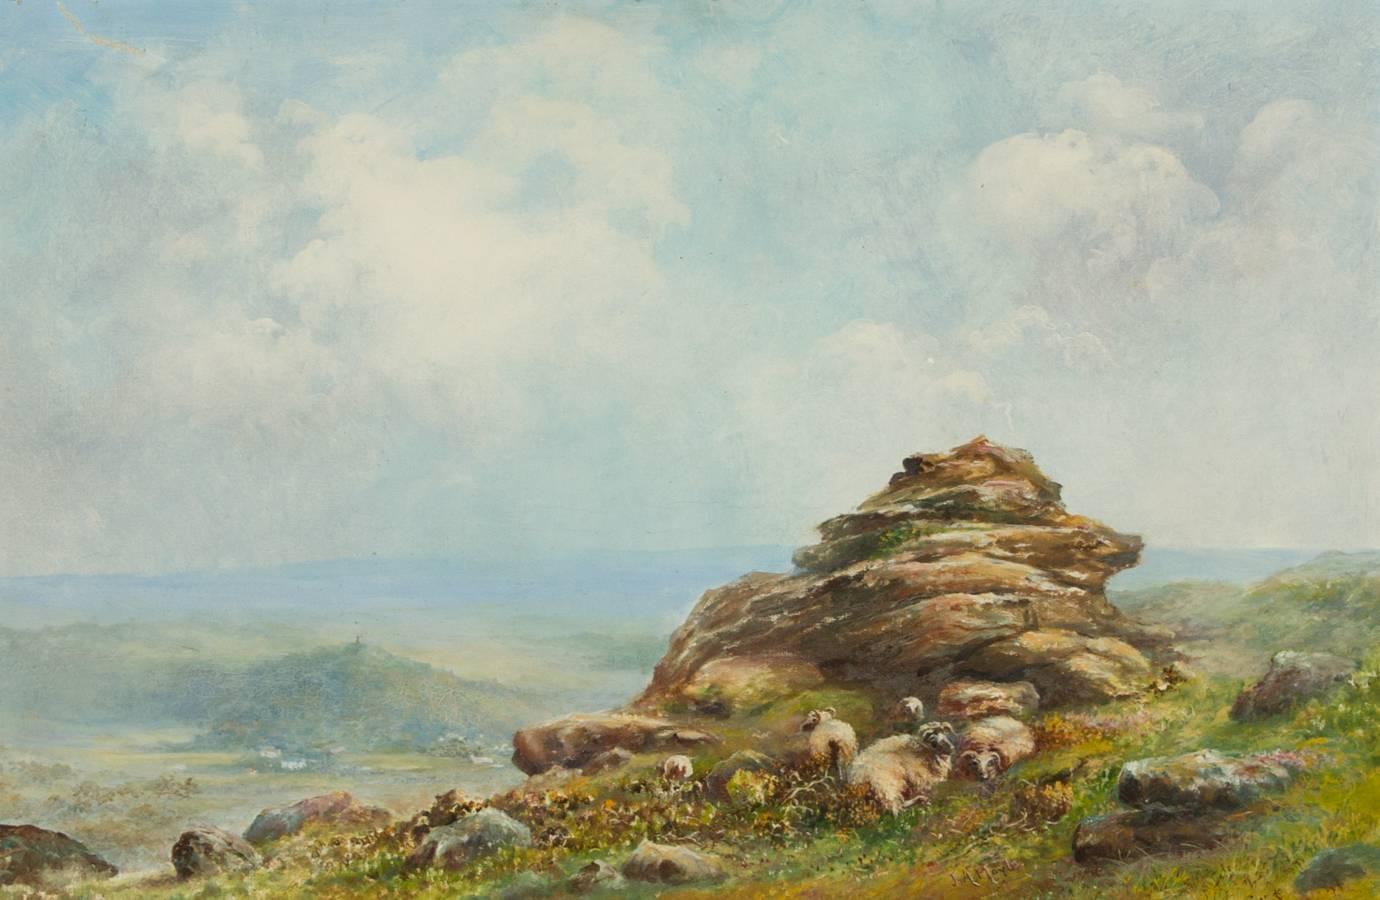 An impressive large early 20th century oil painting signed by the British artist J.A. Moyle depicting a Dartmoor landscape. Sheep are resting and grazing by a rock formation and there is a village beyond. Presented in an ornate gilt frame with gilt